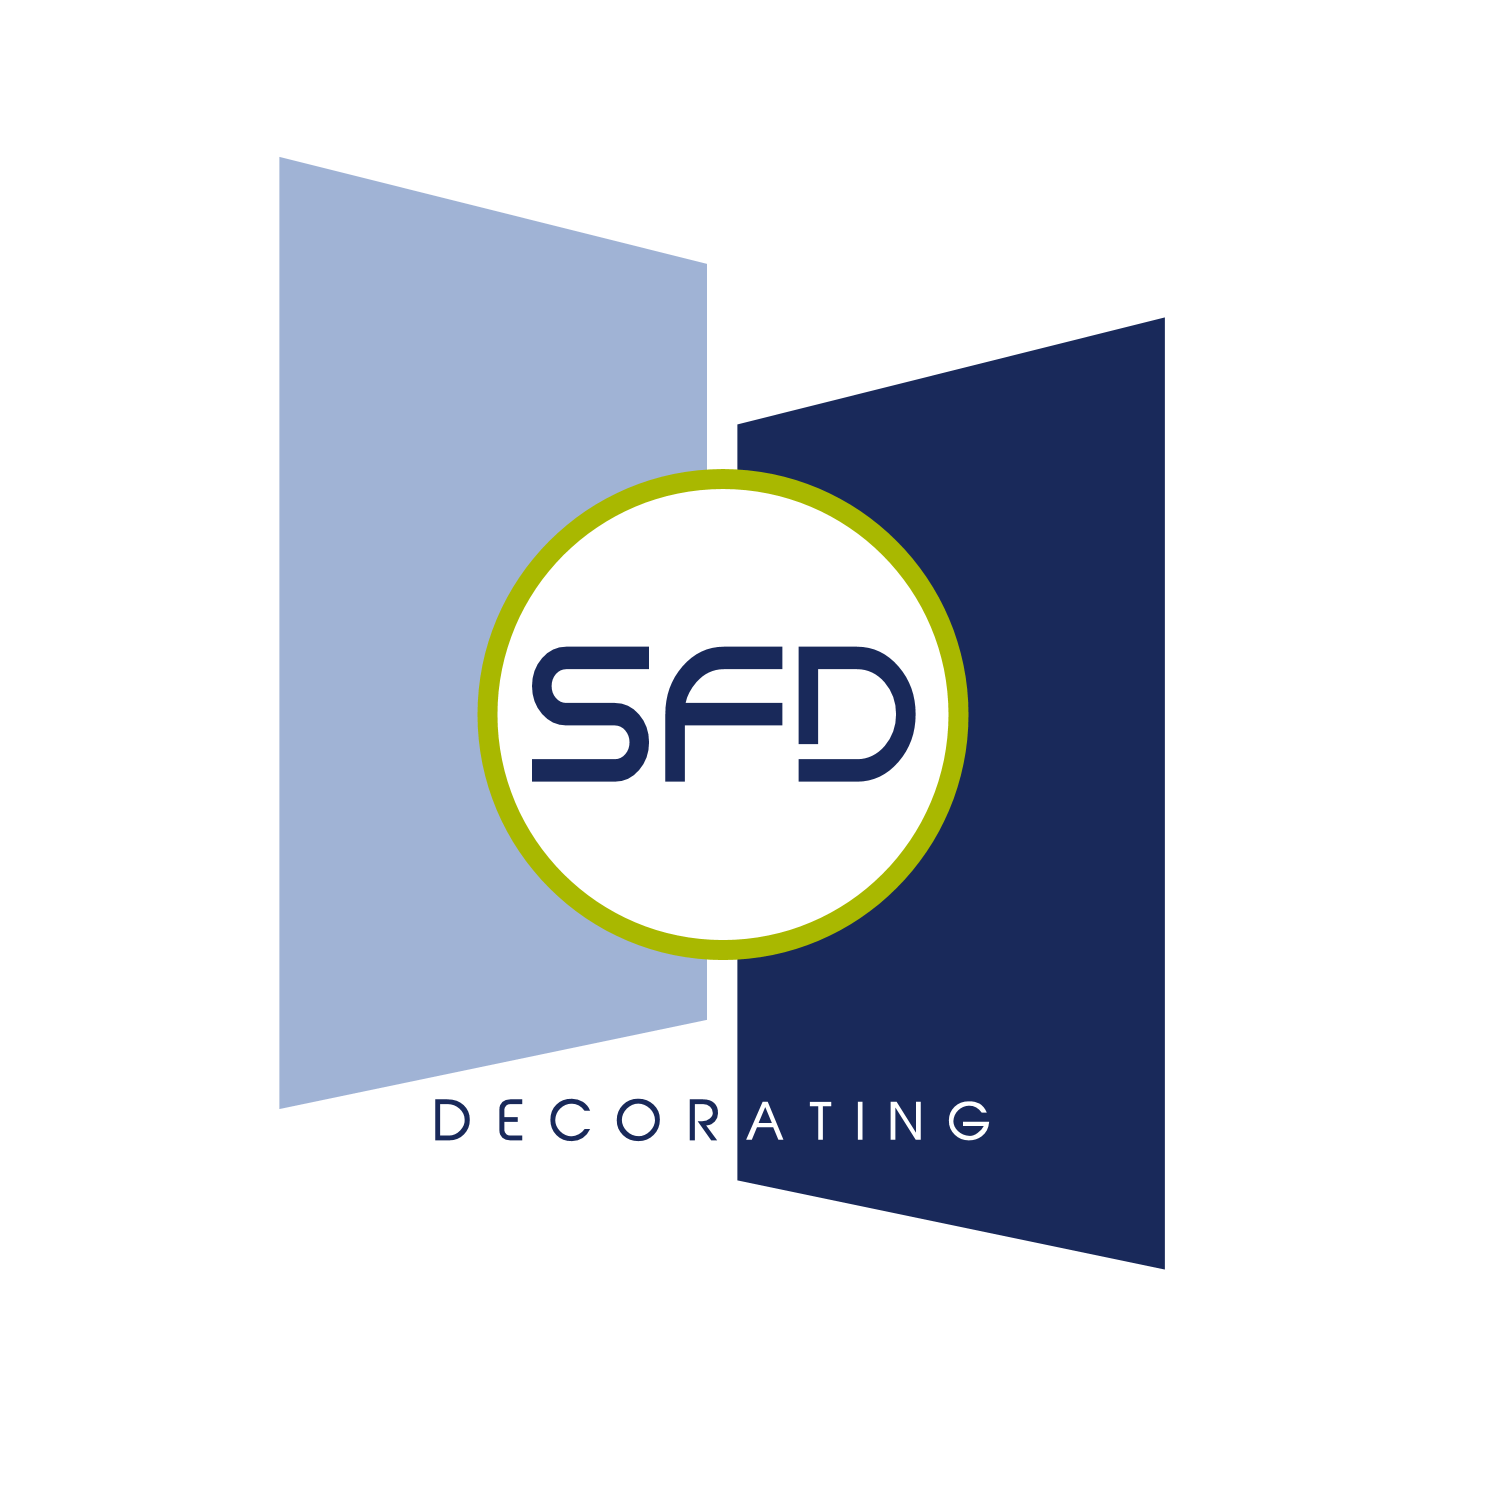 SFD Logo - Modern, Professional, Painting And Decorating Logo Design for SFD ...